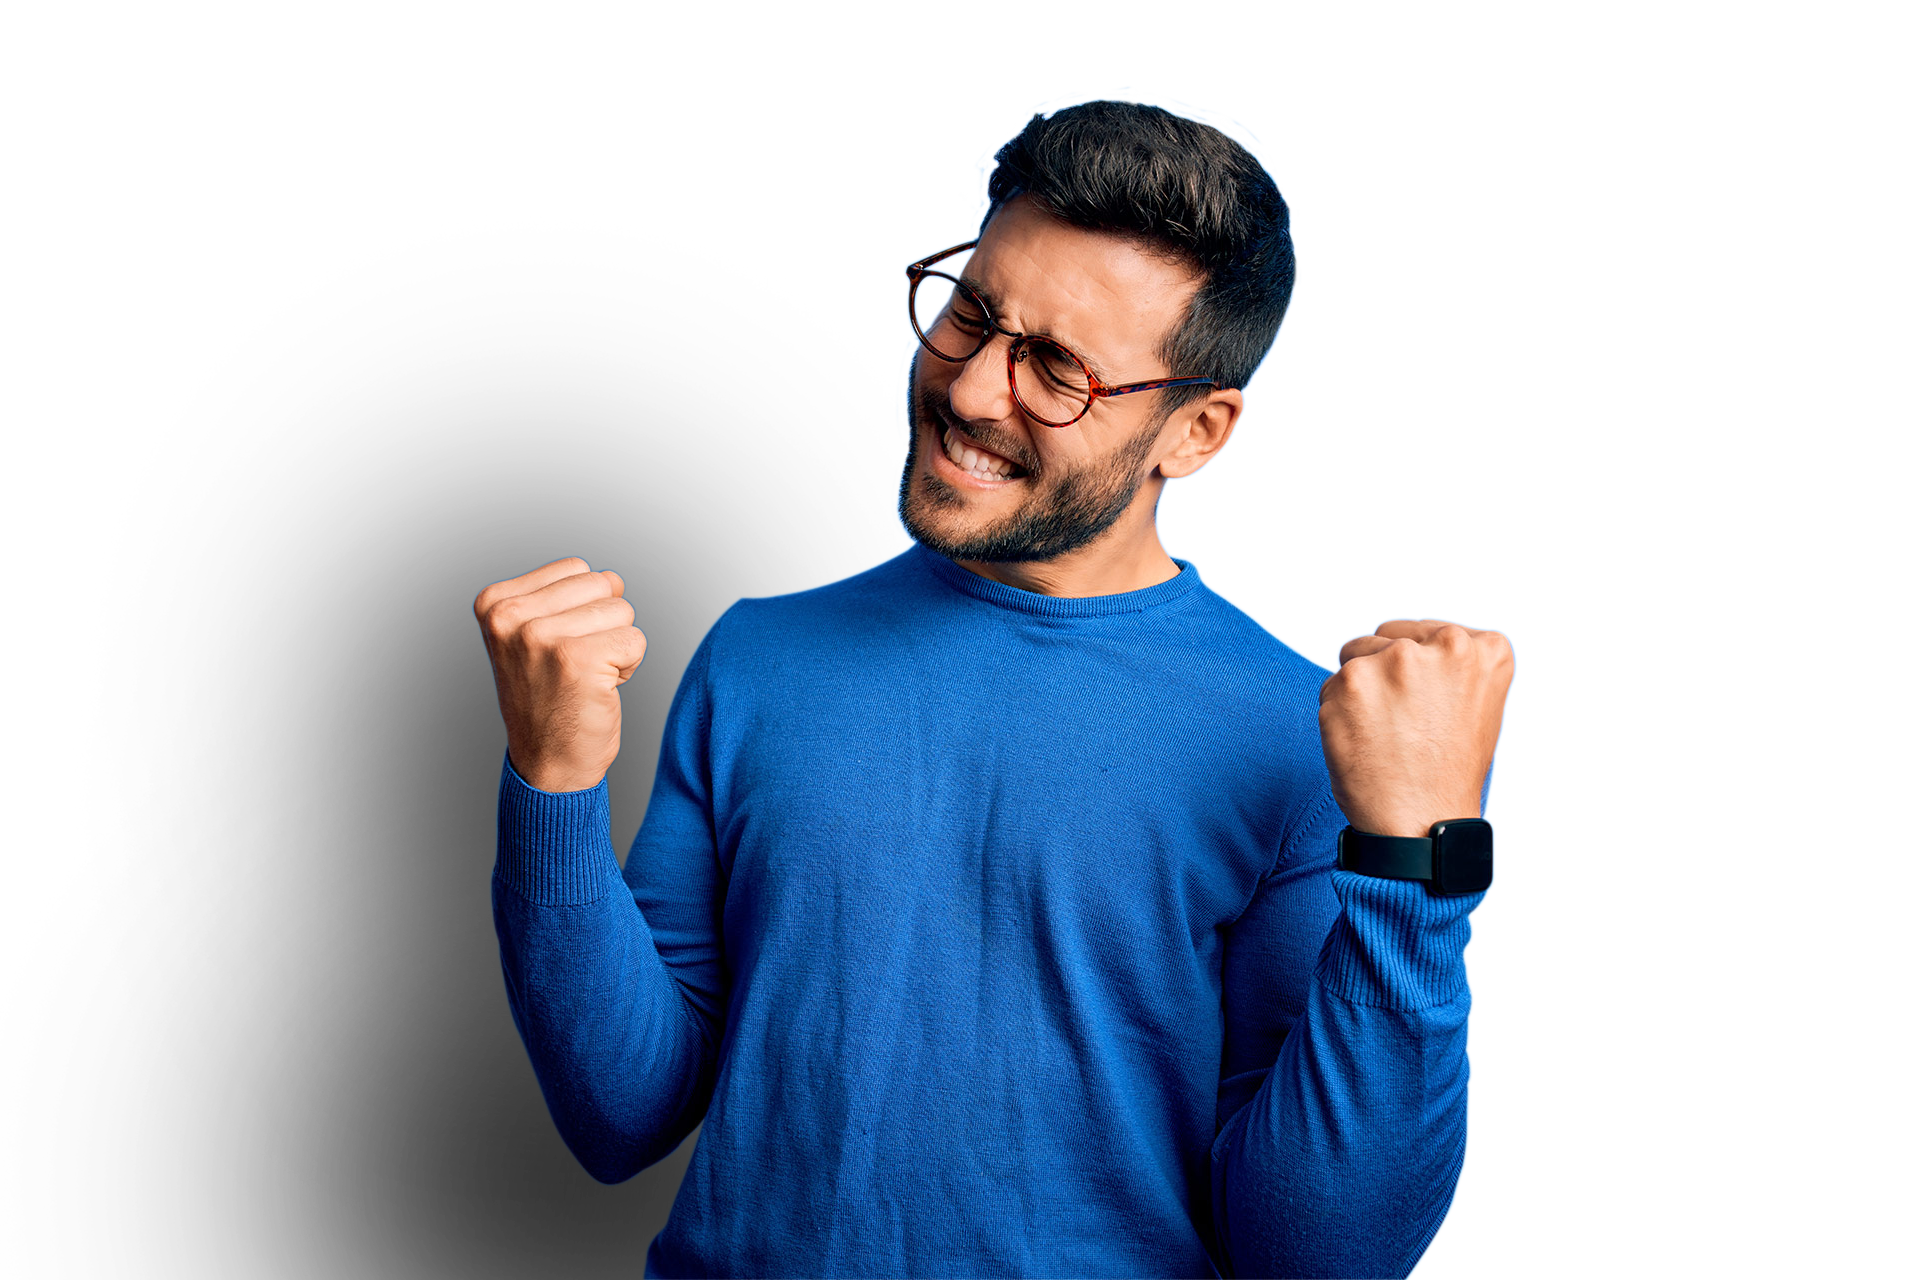 A jubilant man in glasses wearing a blue sweater, with a smartwatch, fists pumped in a victorious gesture against a blue and black background.